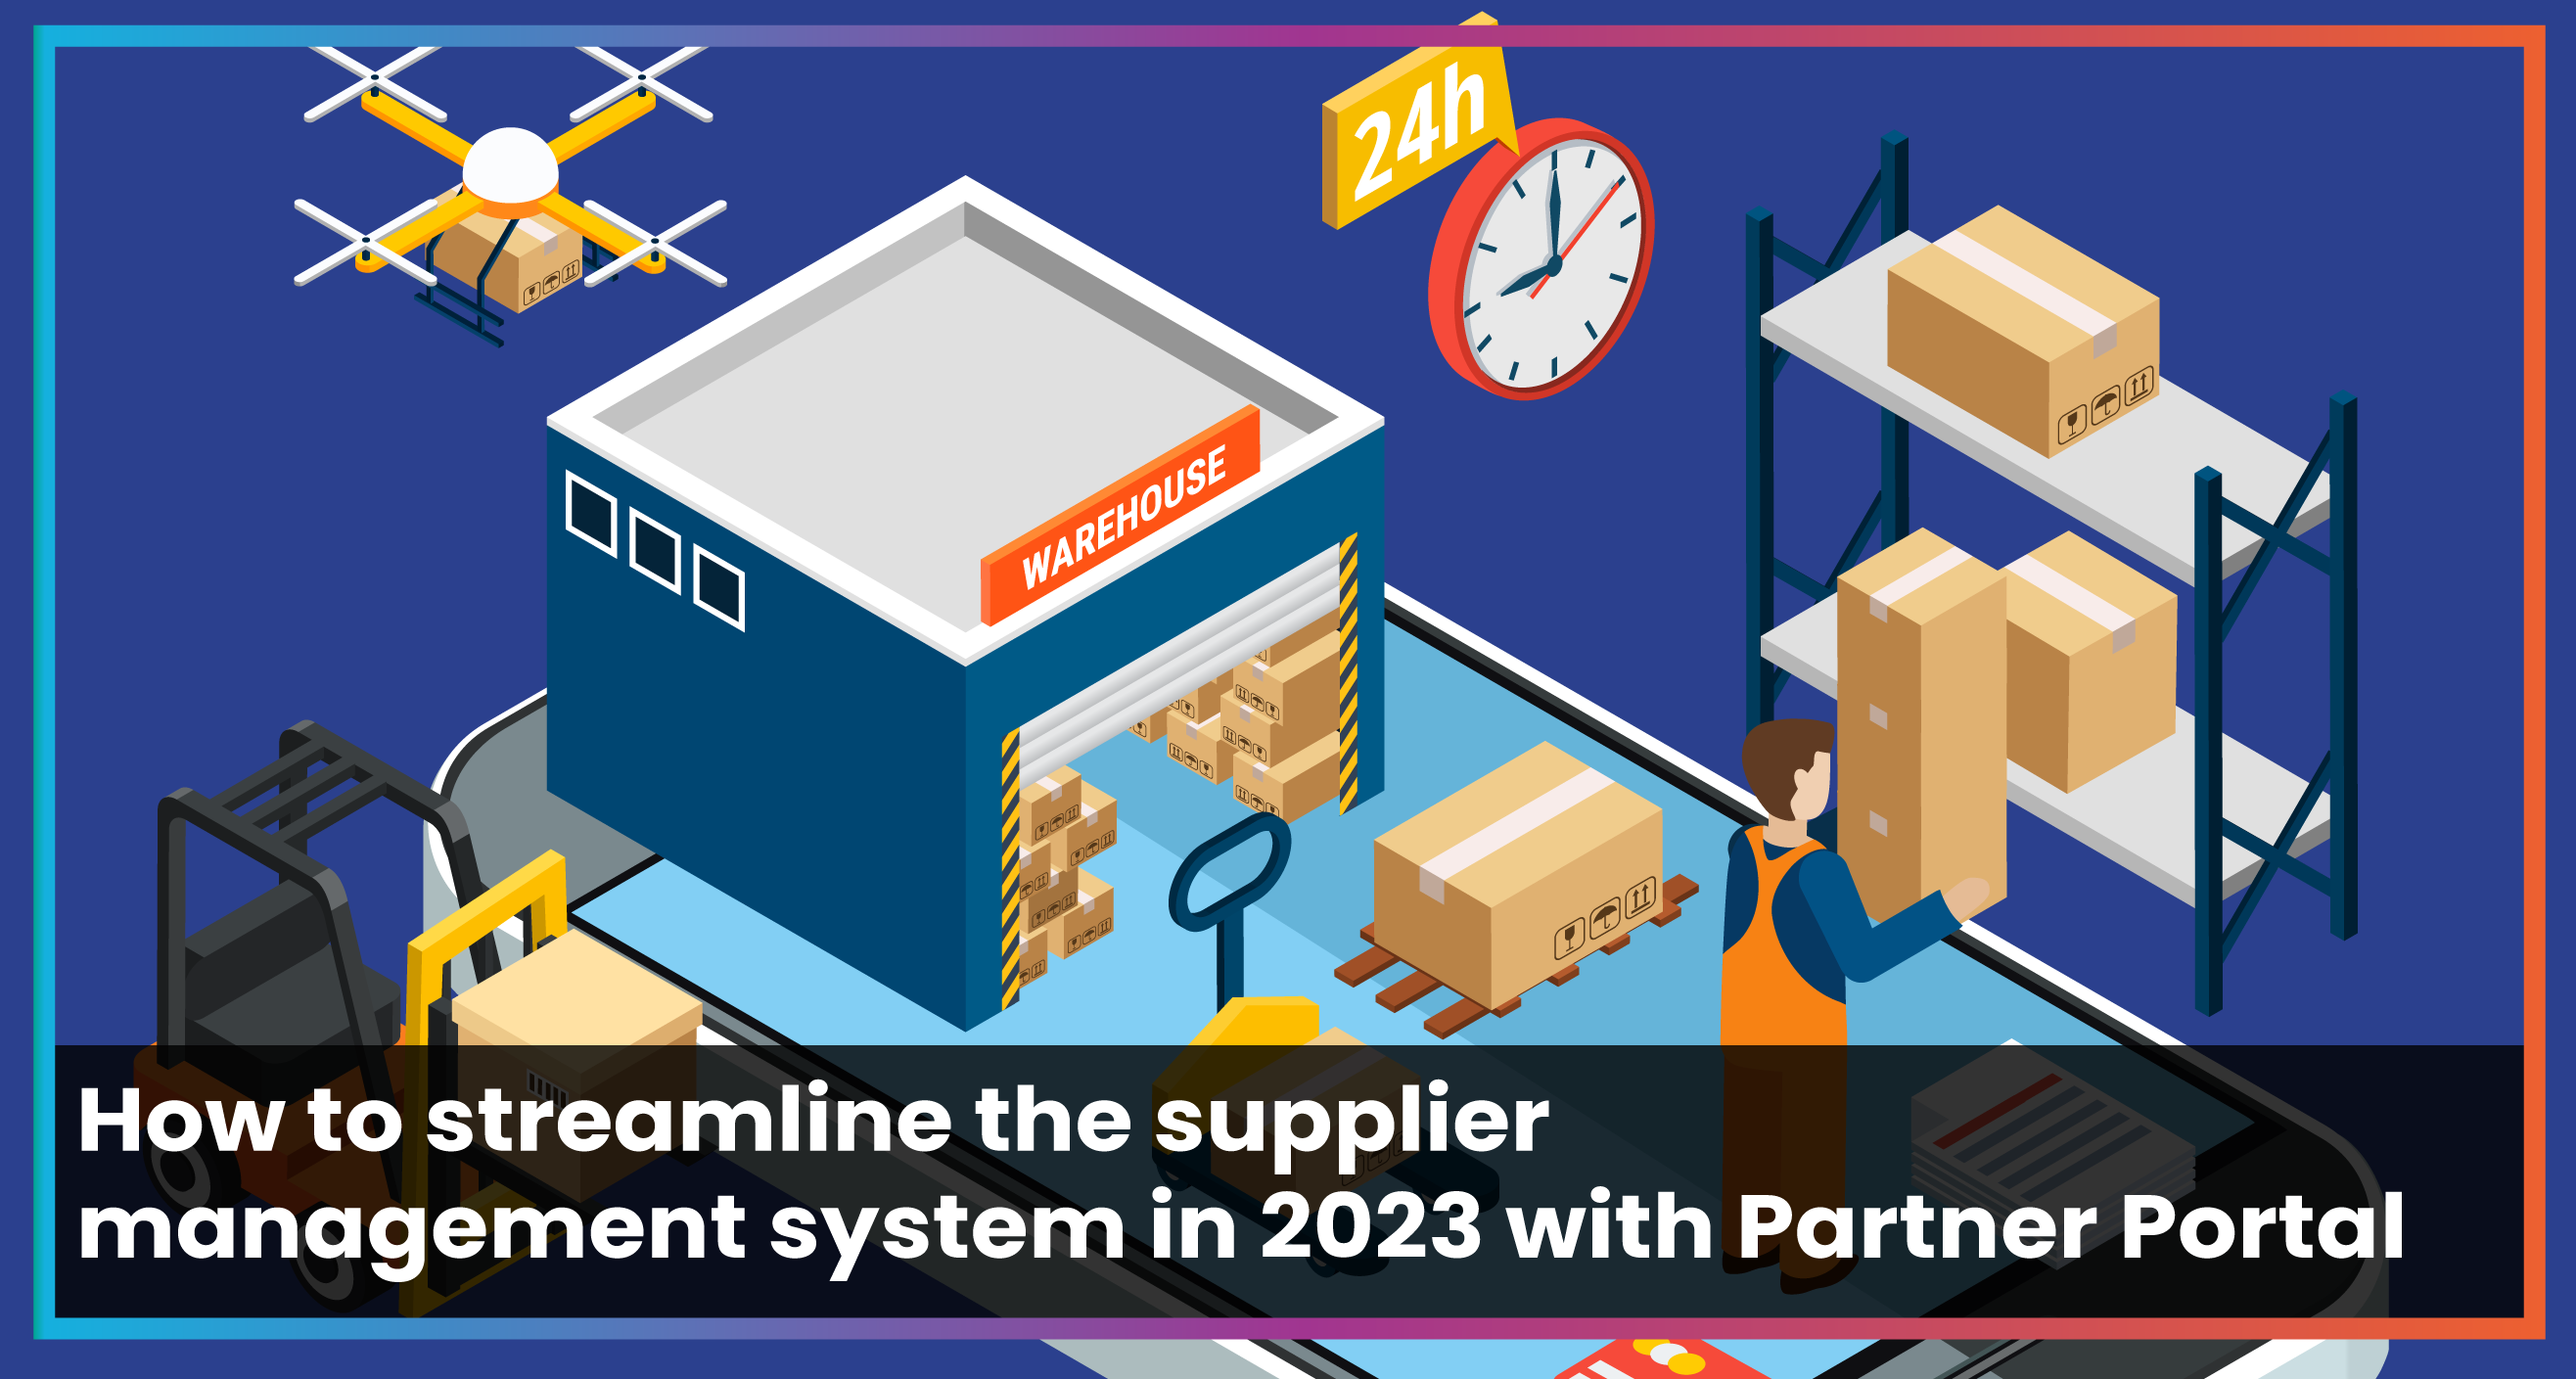 How to streamline the supplier management system in 2023 with Partner Portal